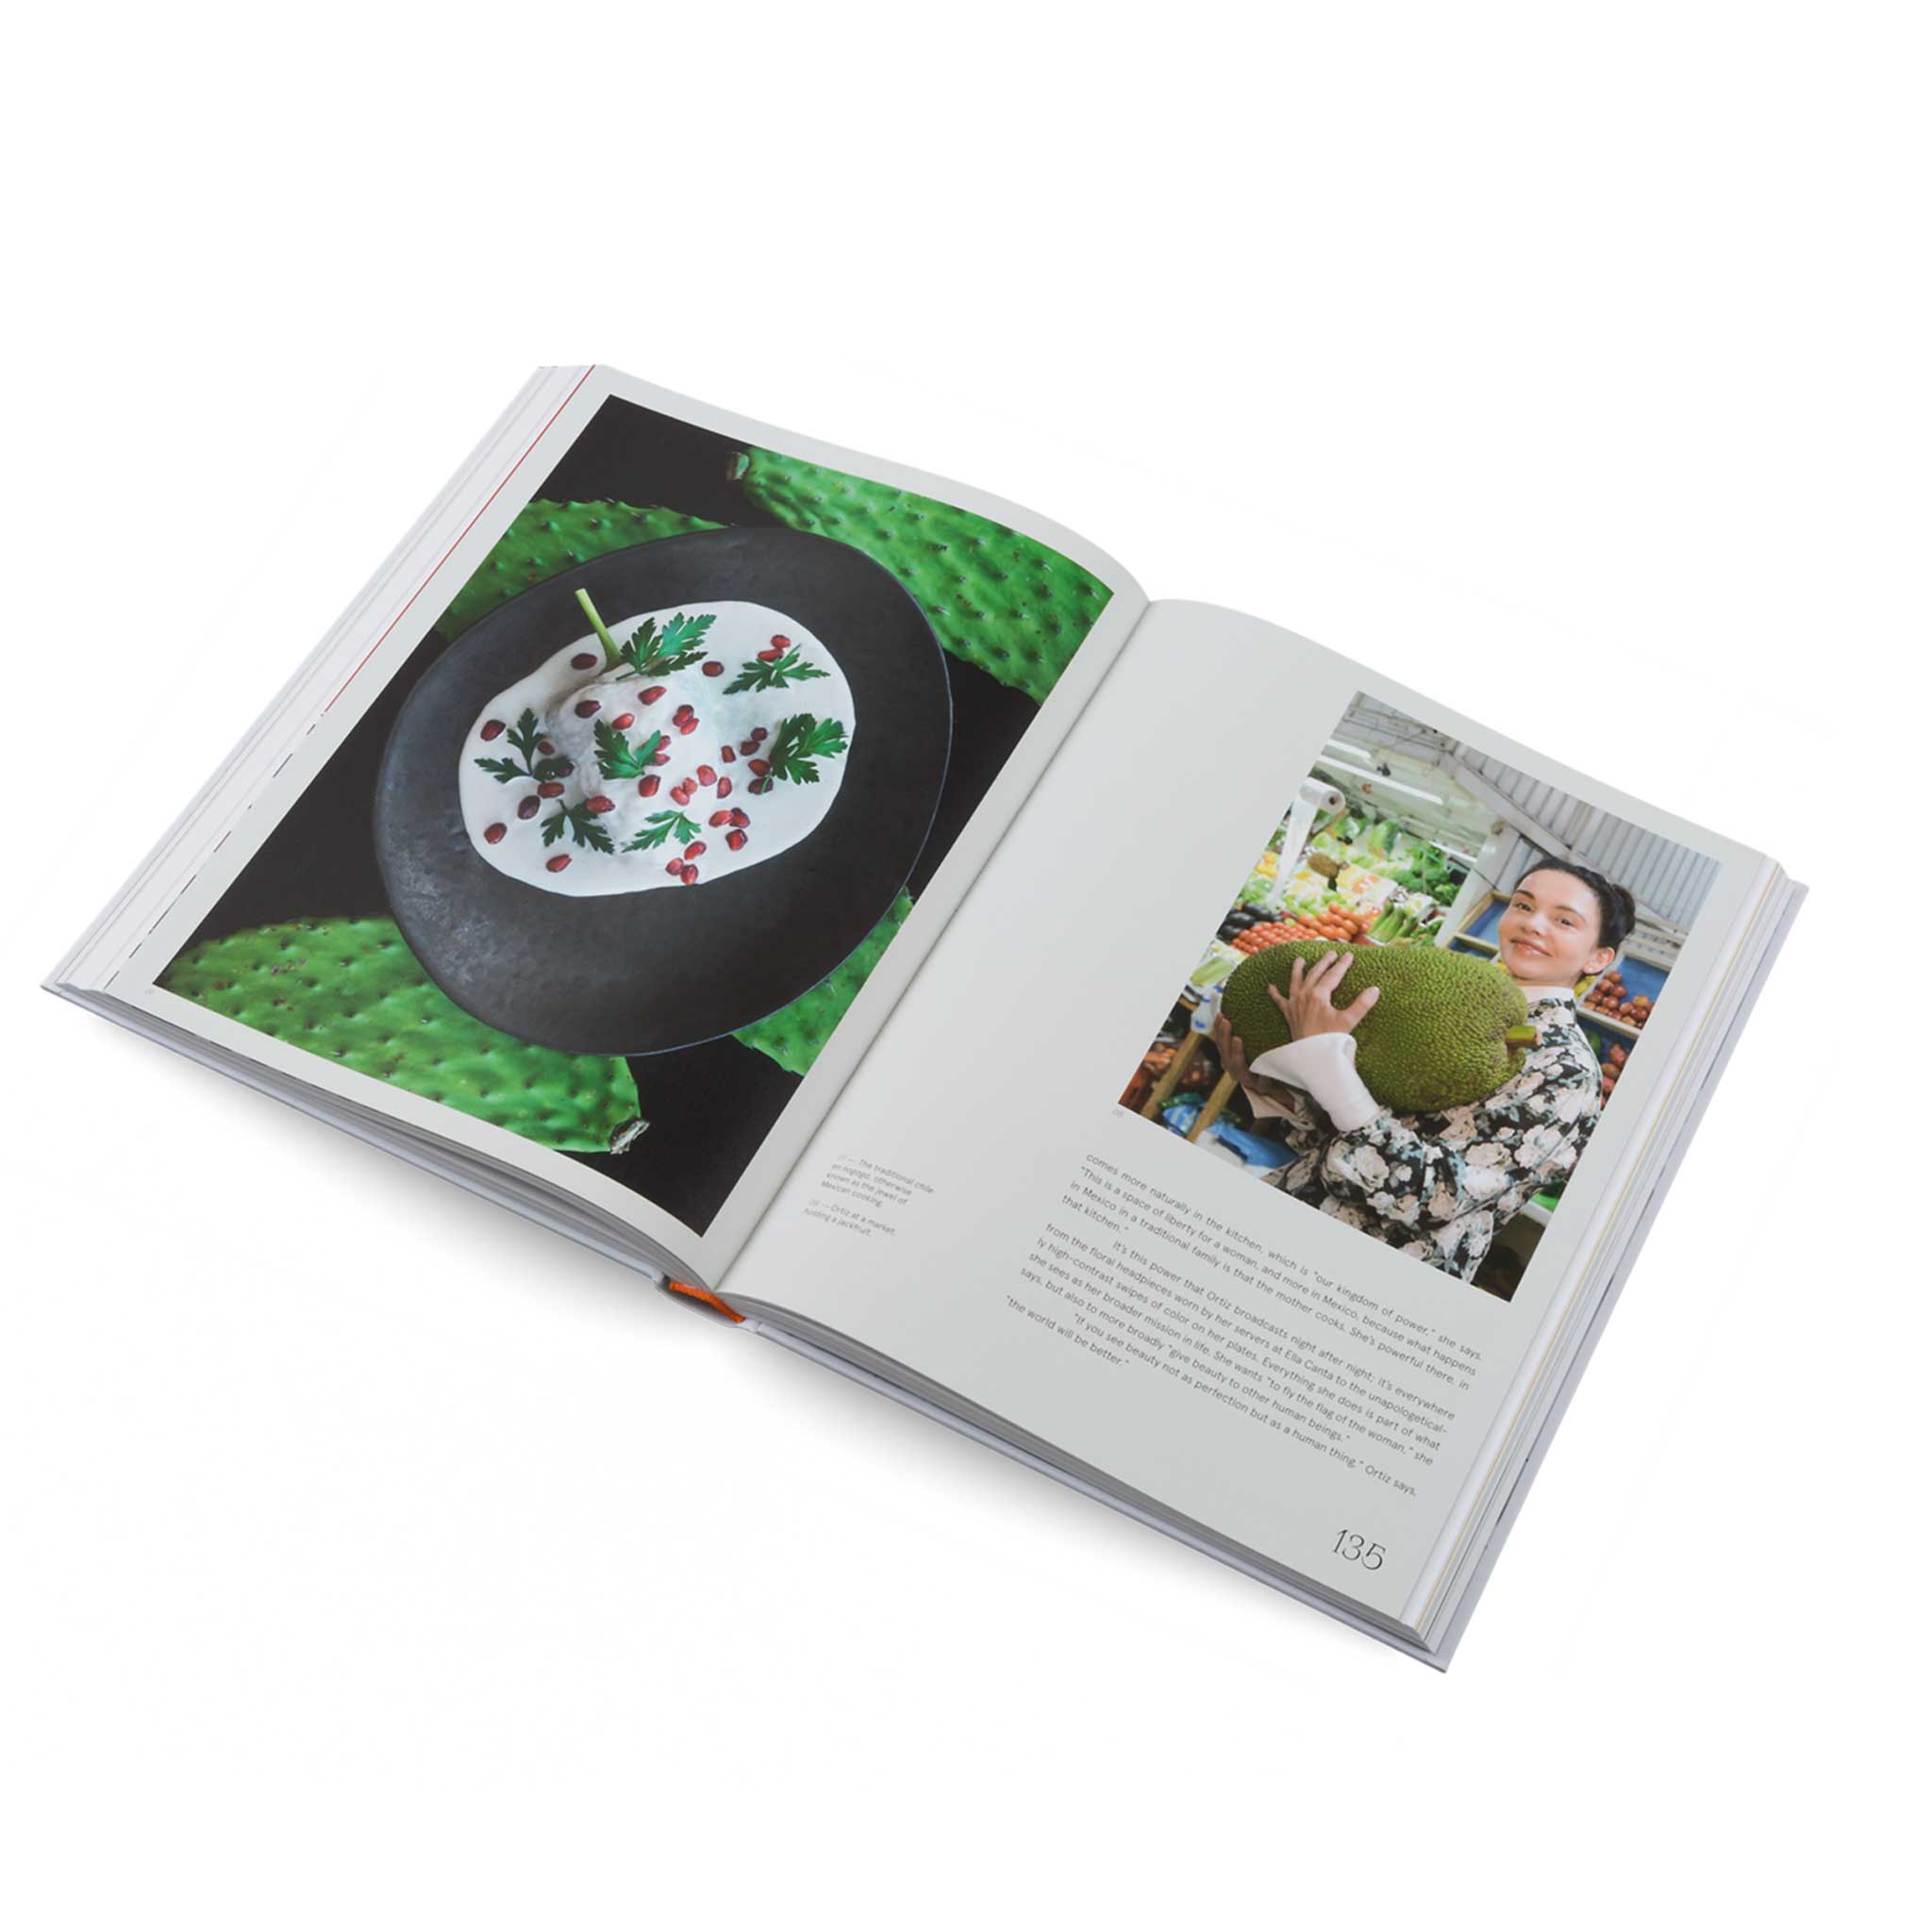 STORY ON A PLATE | The delicate art of plating dishes | BUCH | Gestalten Verlag - Charles & Marie